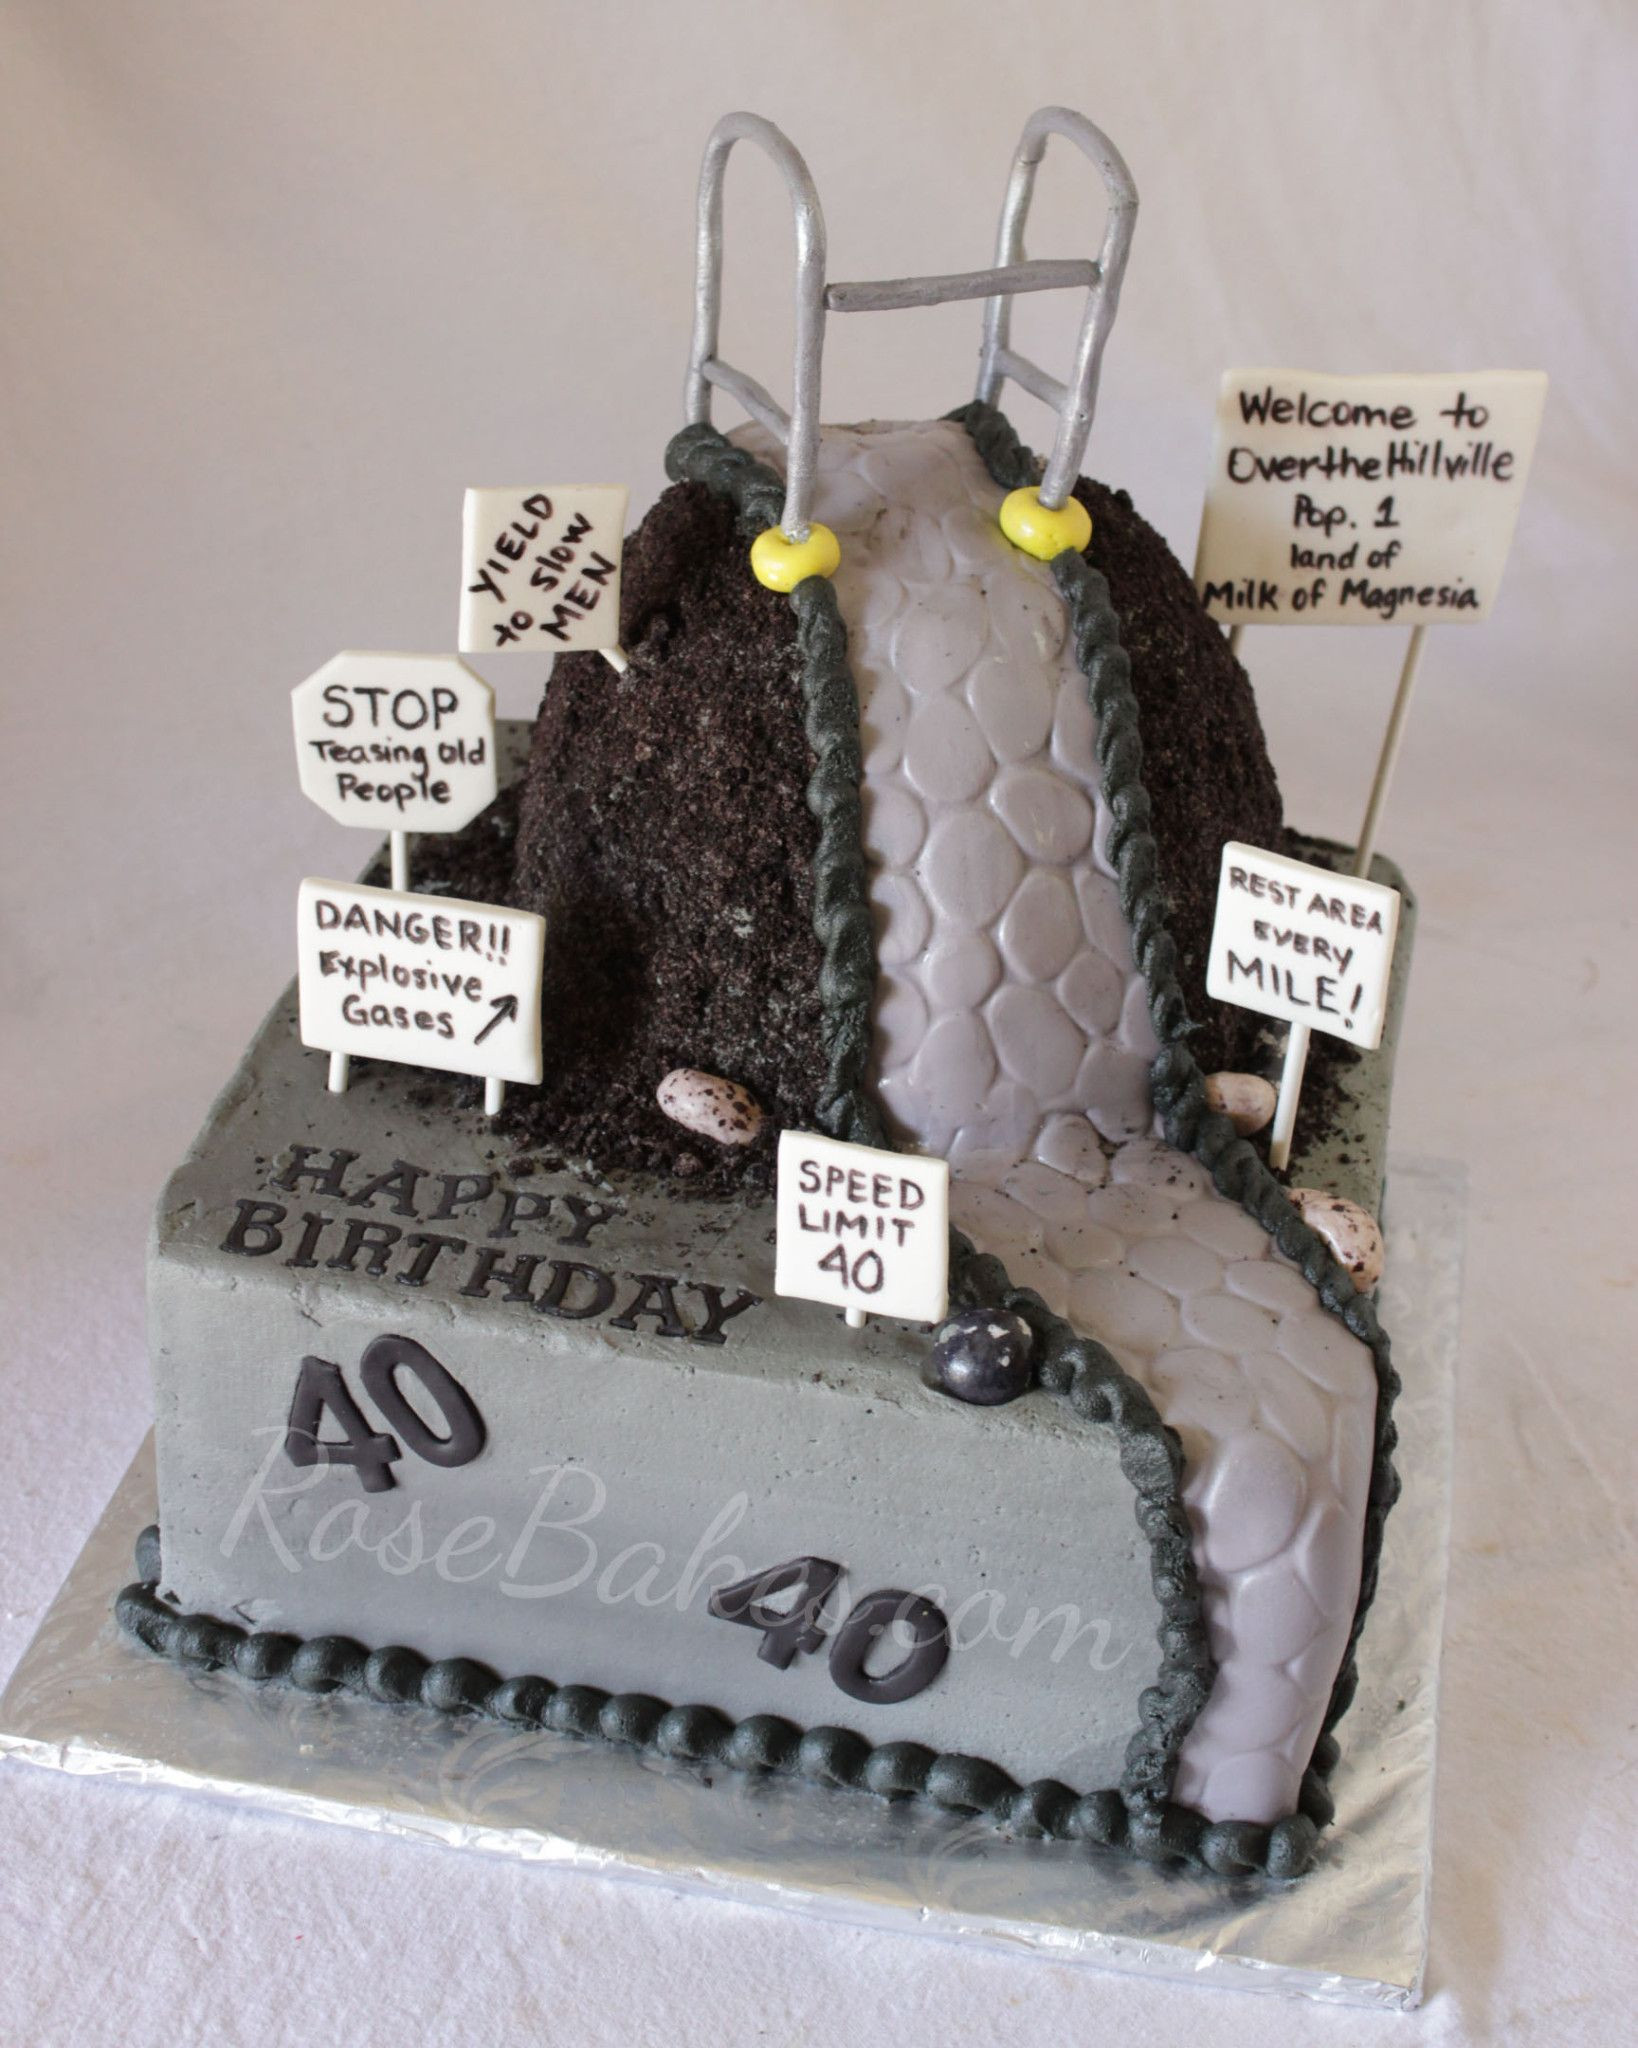 40th Birthday Cake Ideas For Him
 "Over the Hill" 40th Birthday Cake